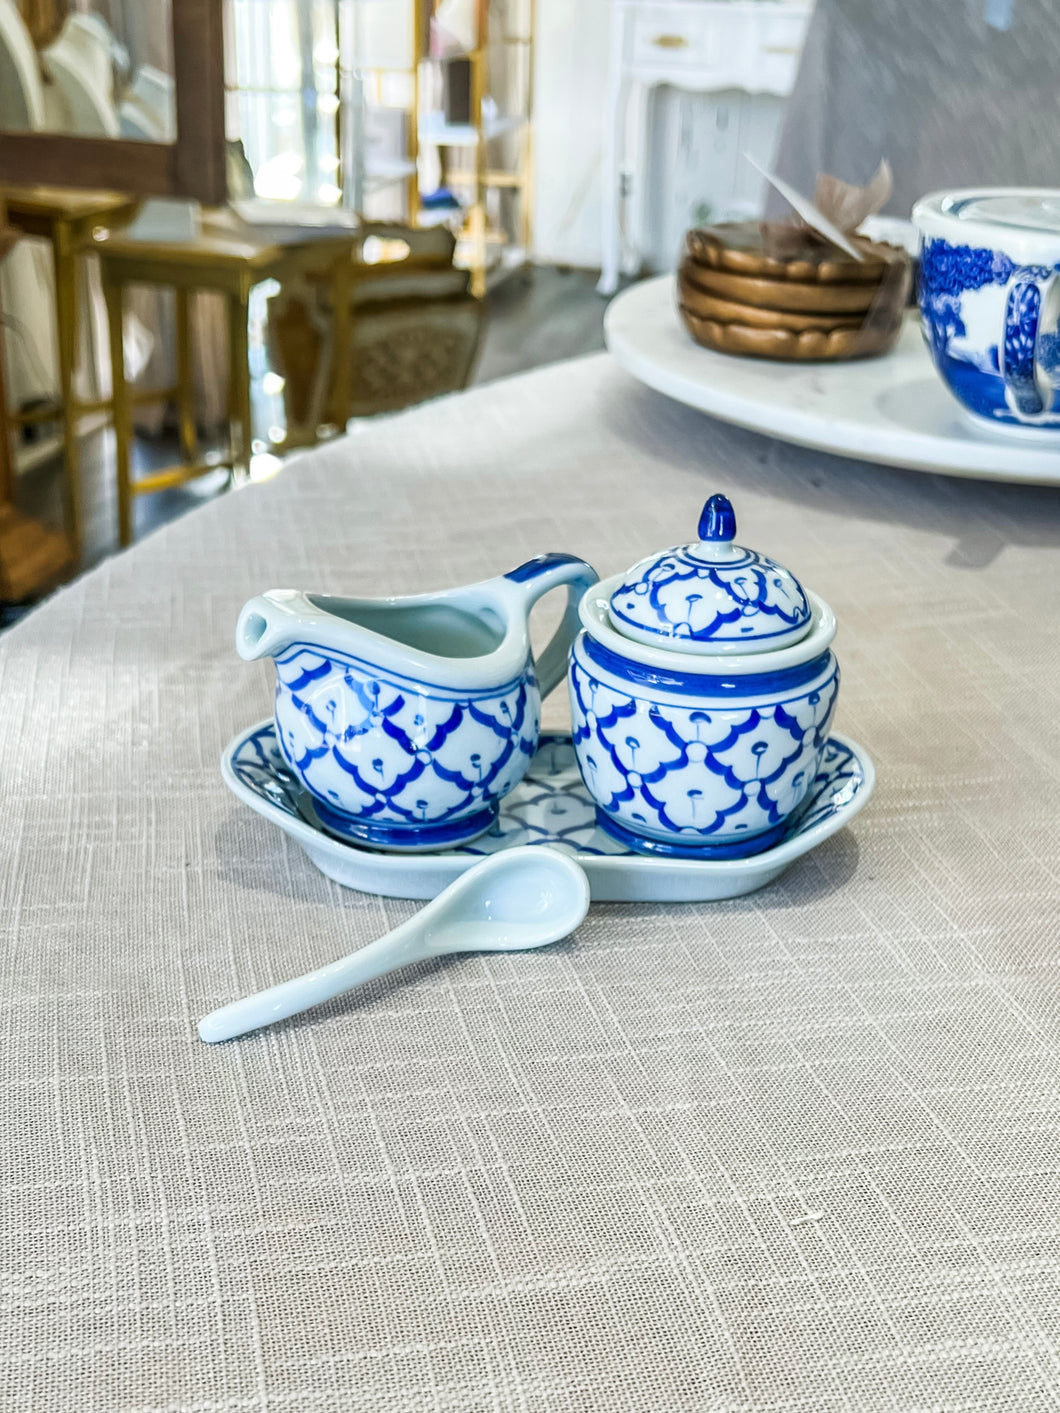 Blue and white creamer,sugar, and tray set